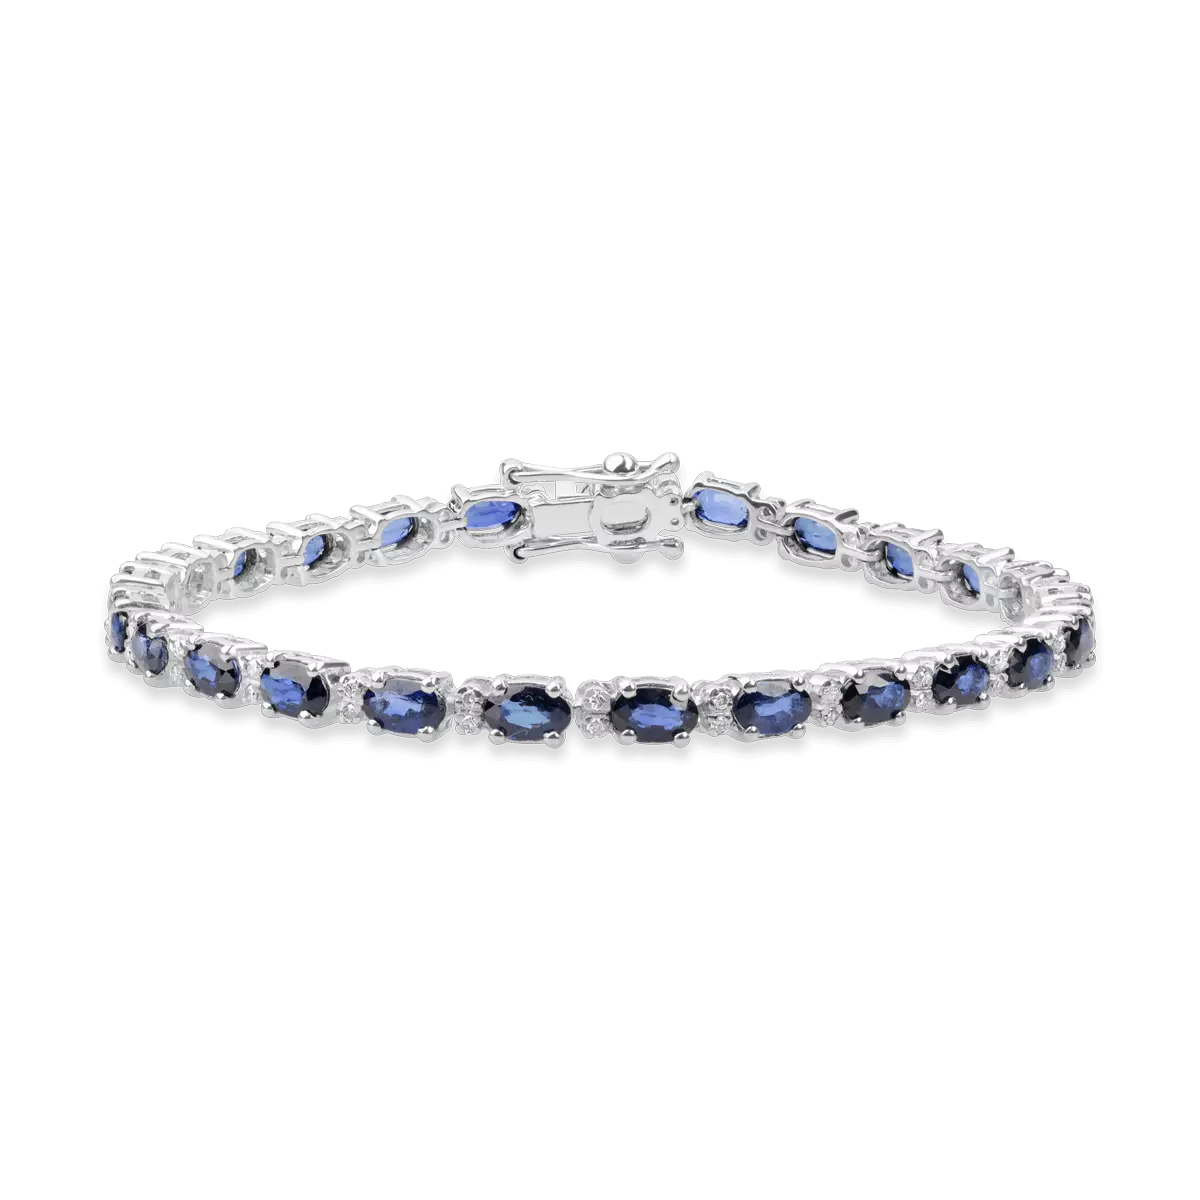 18K white gold bracelet with 8.73ct treated sapphires and 0.27ct diamonds